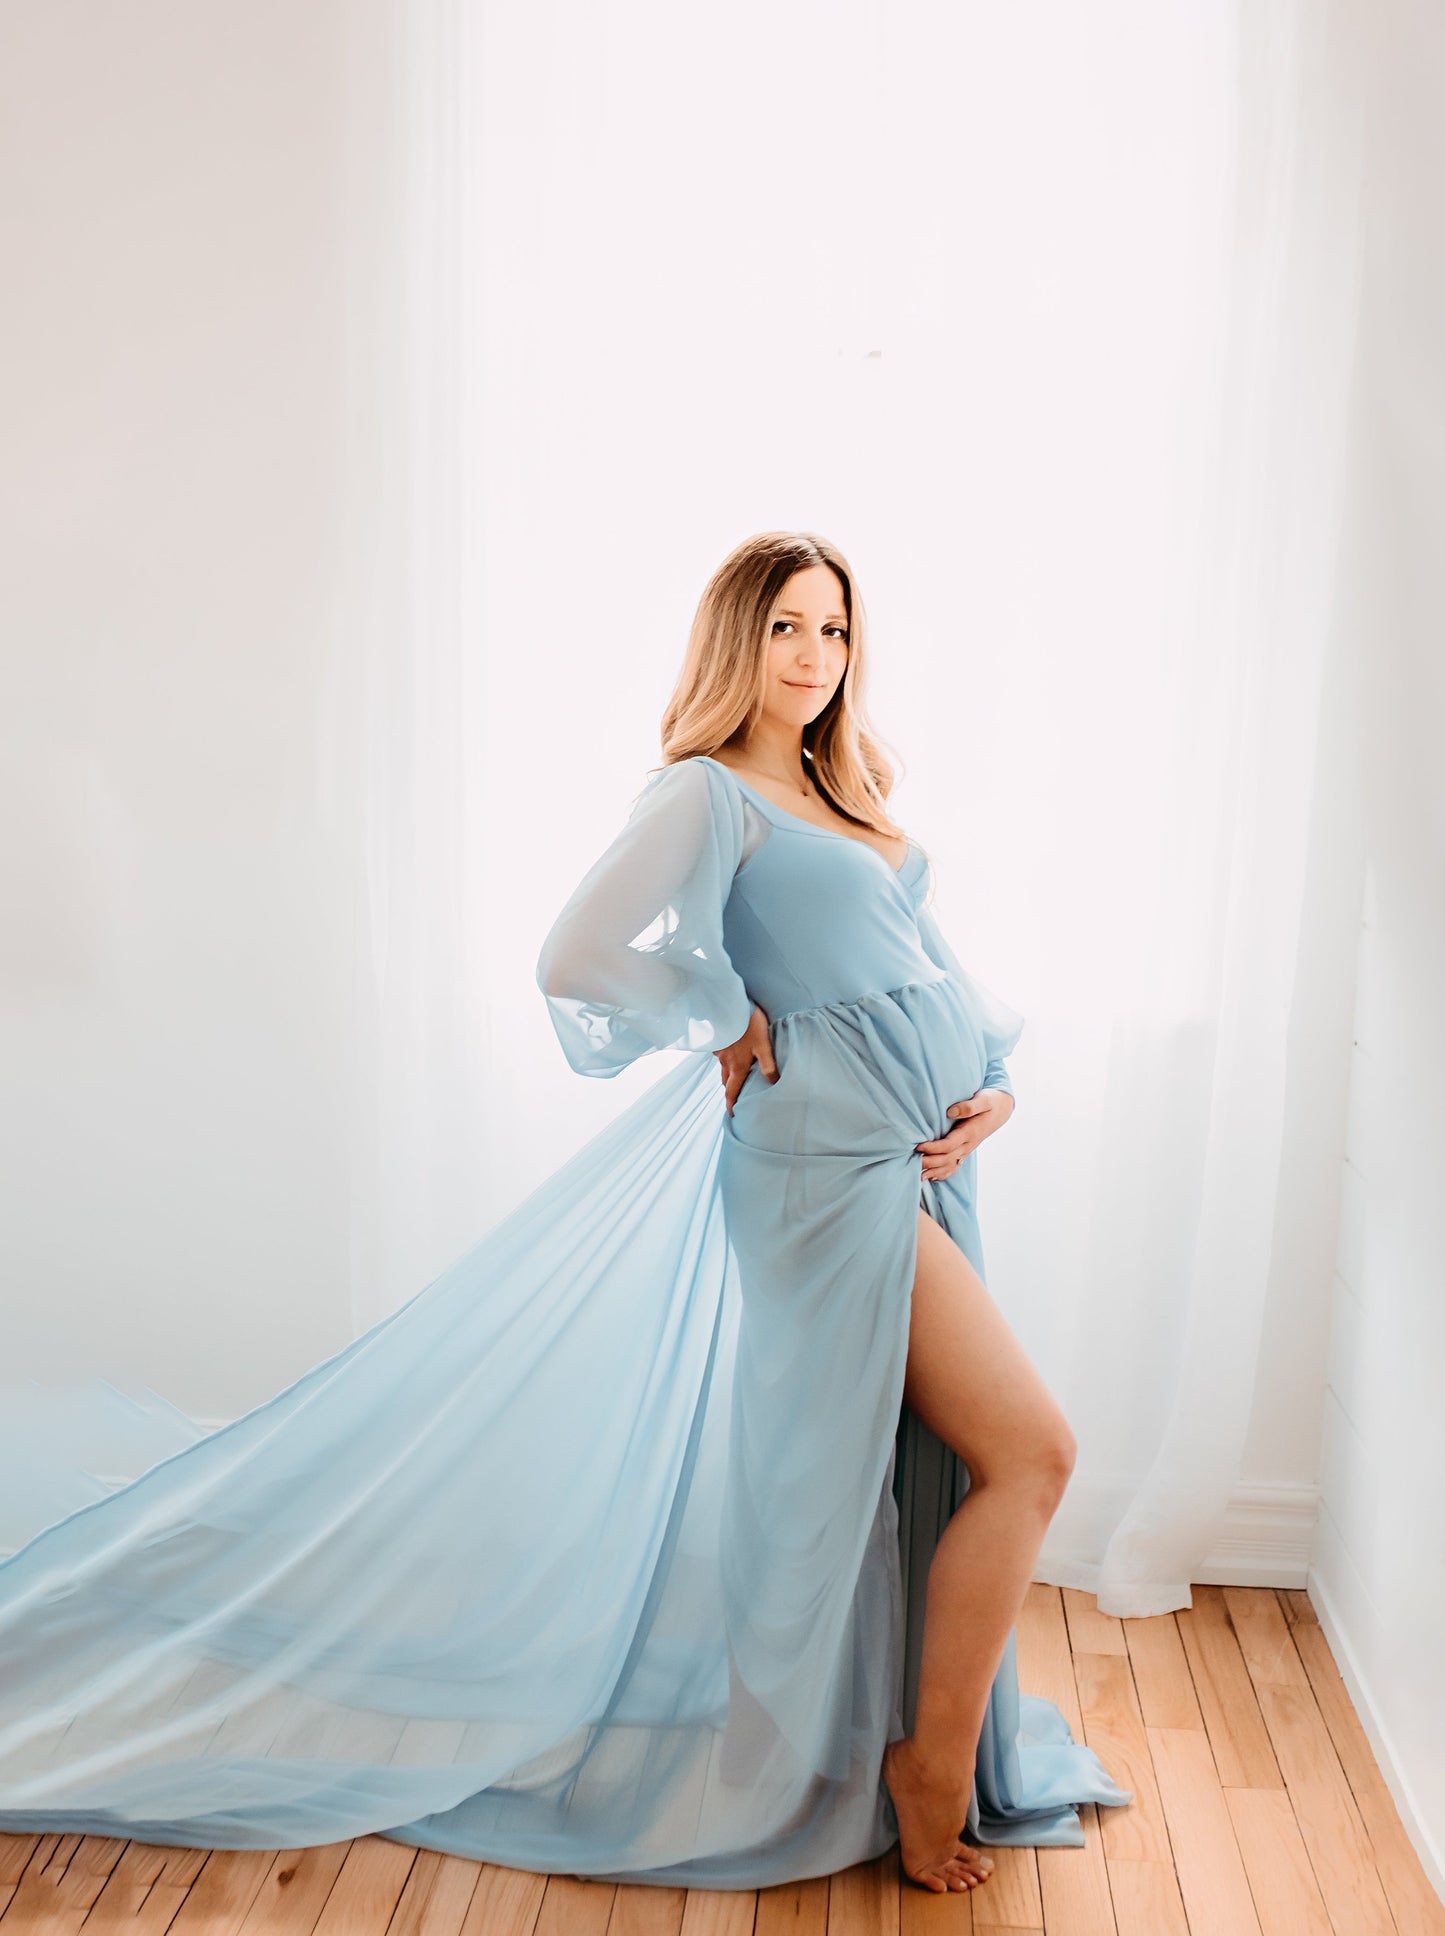 Baby Blue "Cinderella" Ophellia Gown - maternity photoshoot dress